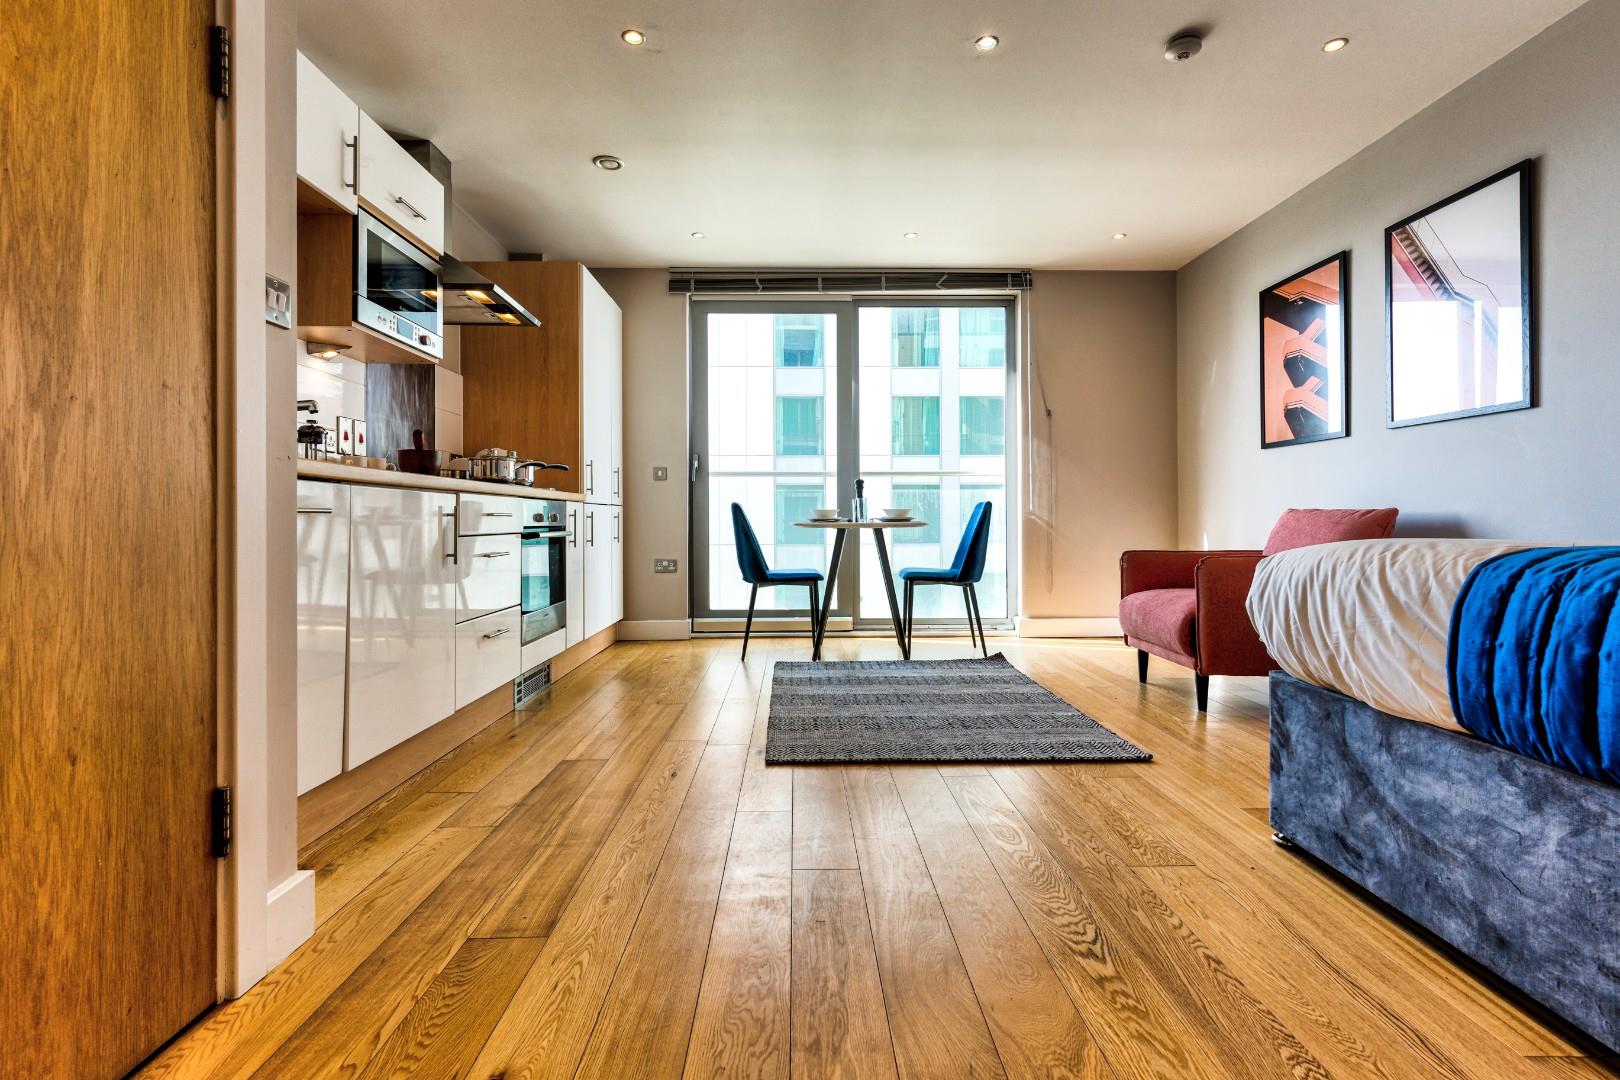 Apartment for sale in Bute Terrace, Cardiff - Property Image 1